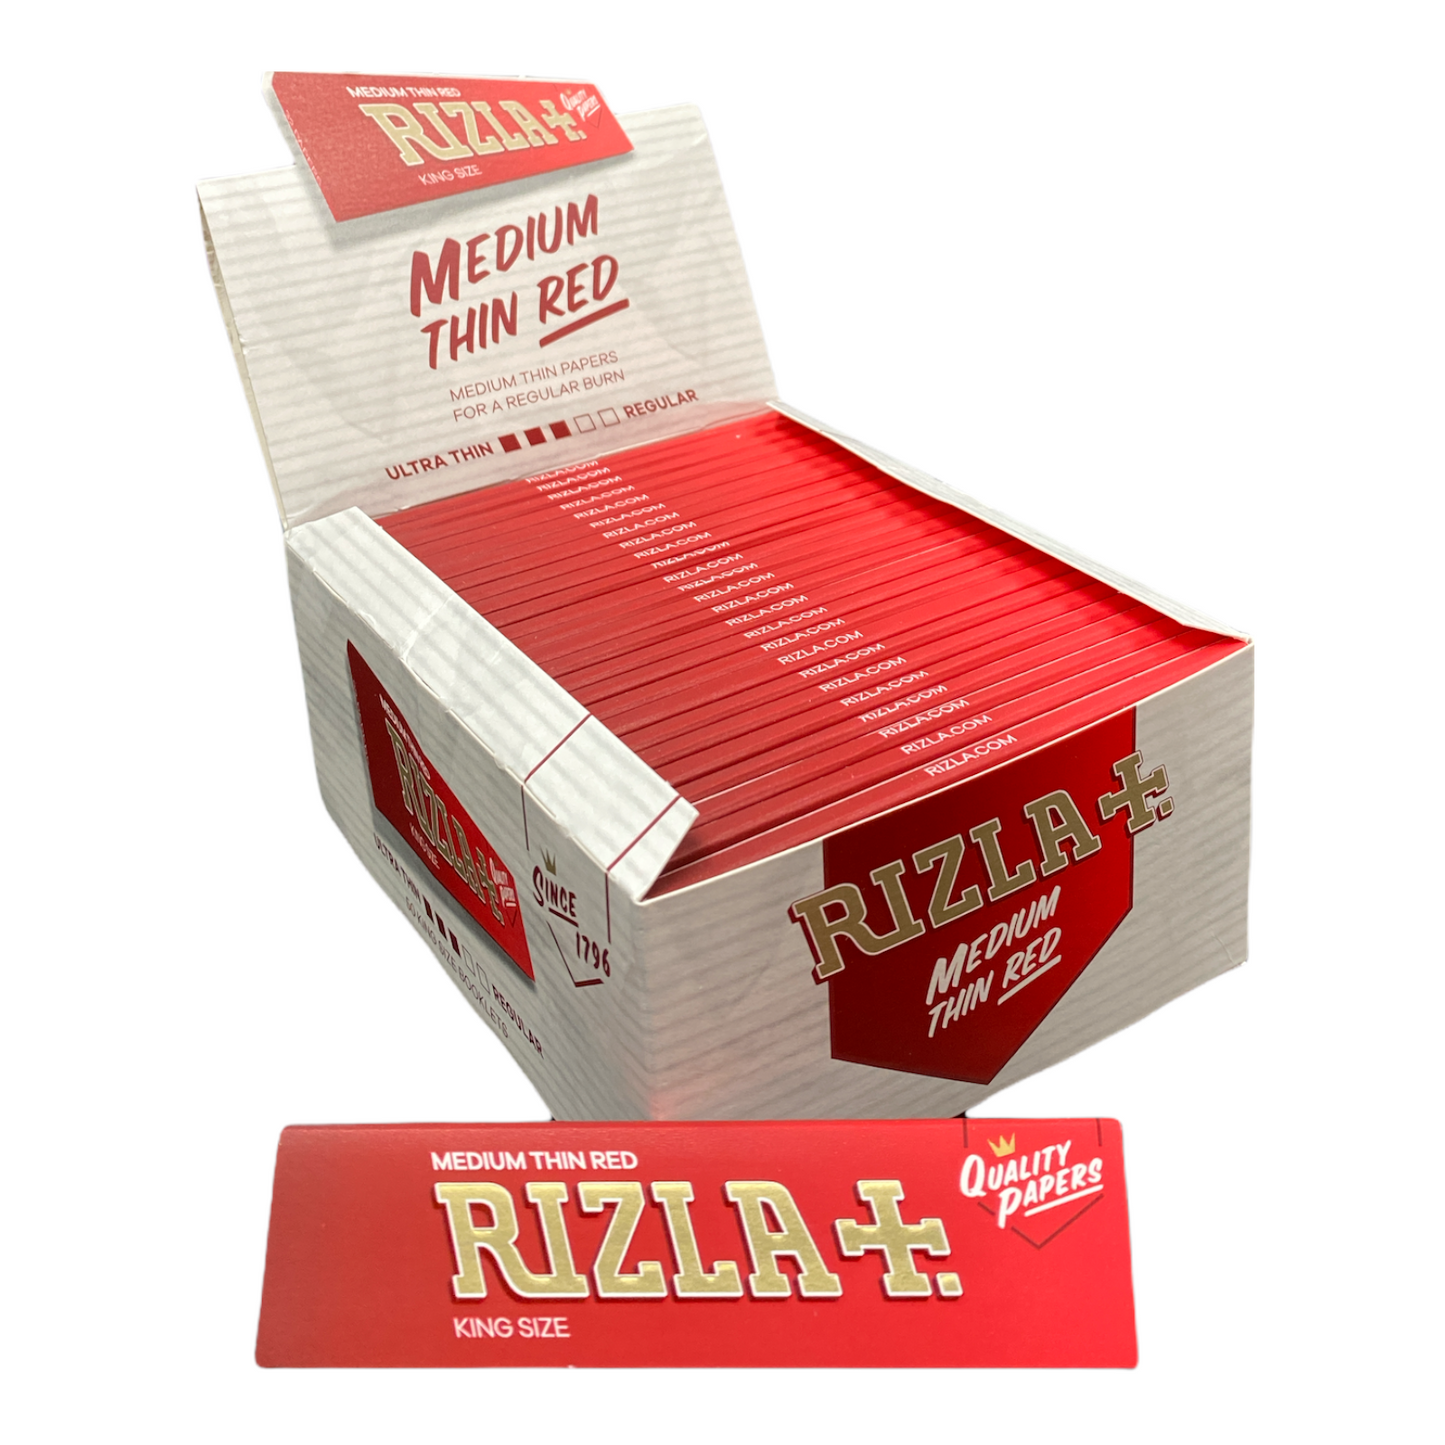 Rizla Red King size